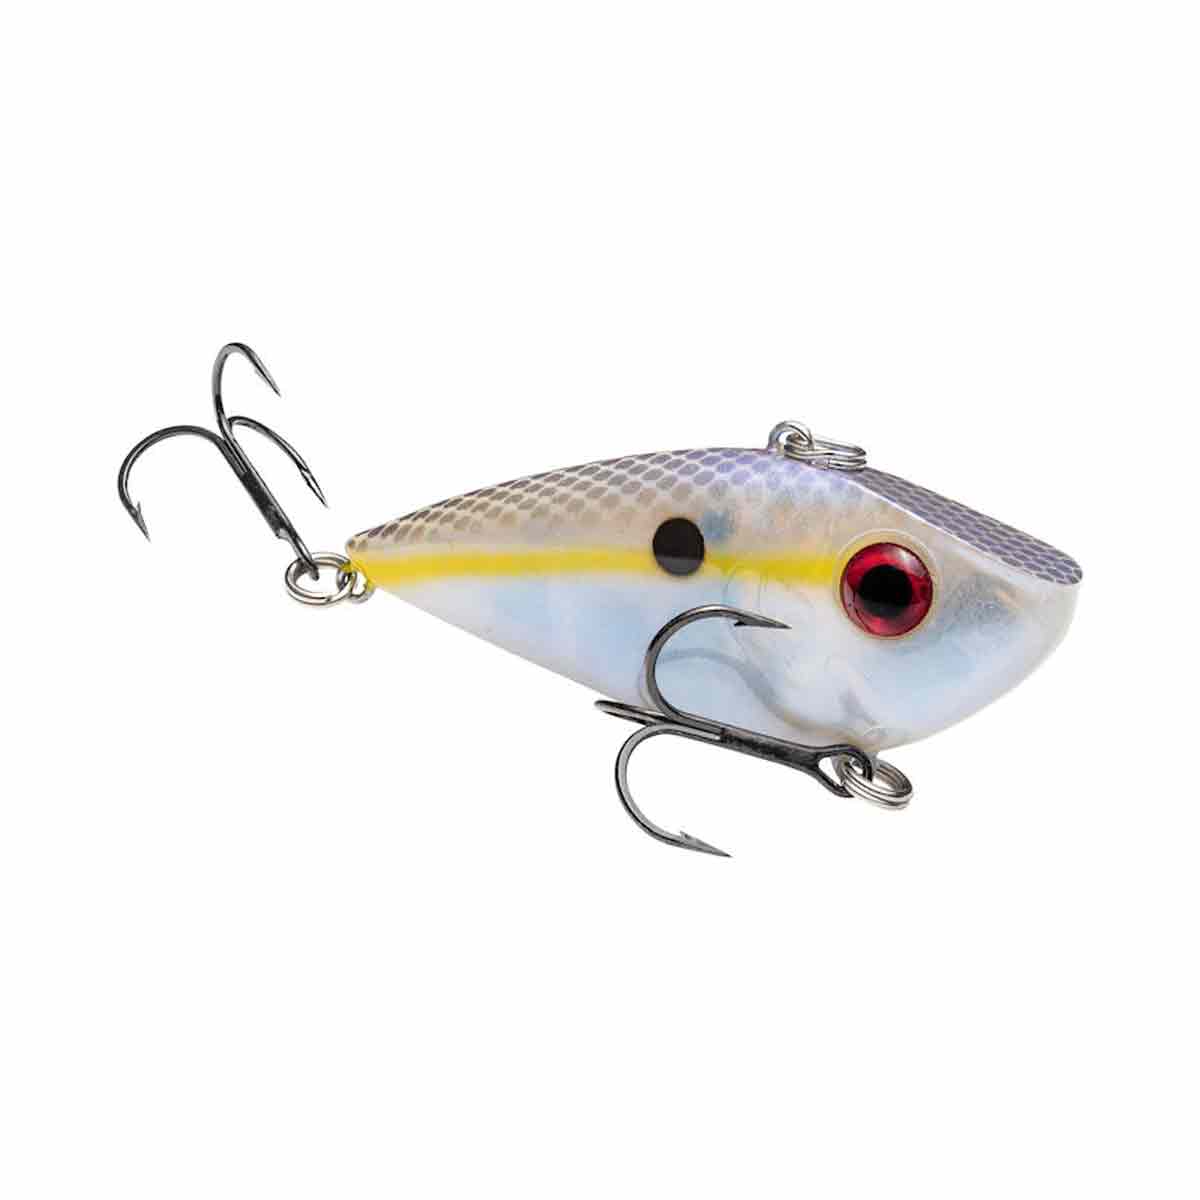 Red Eyed Shad_Chartreuse Shad